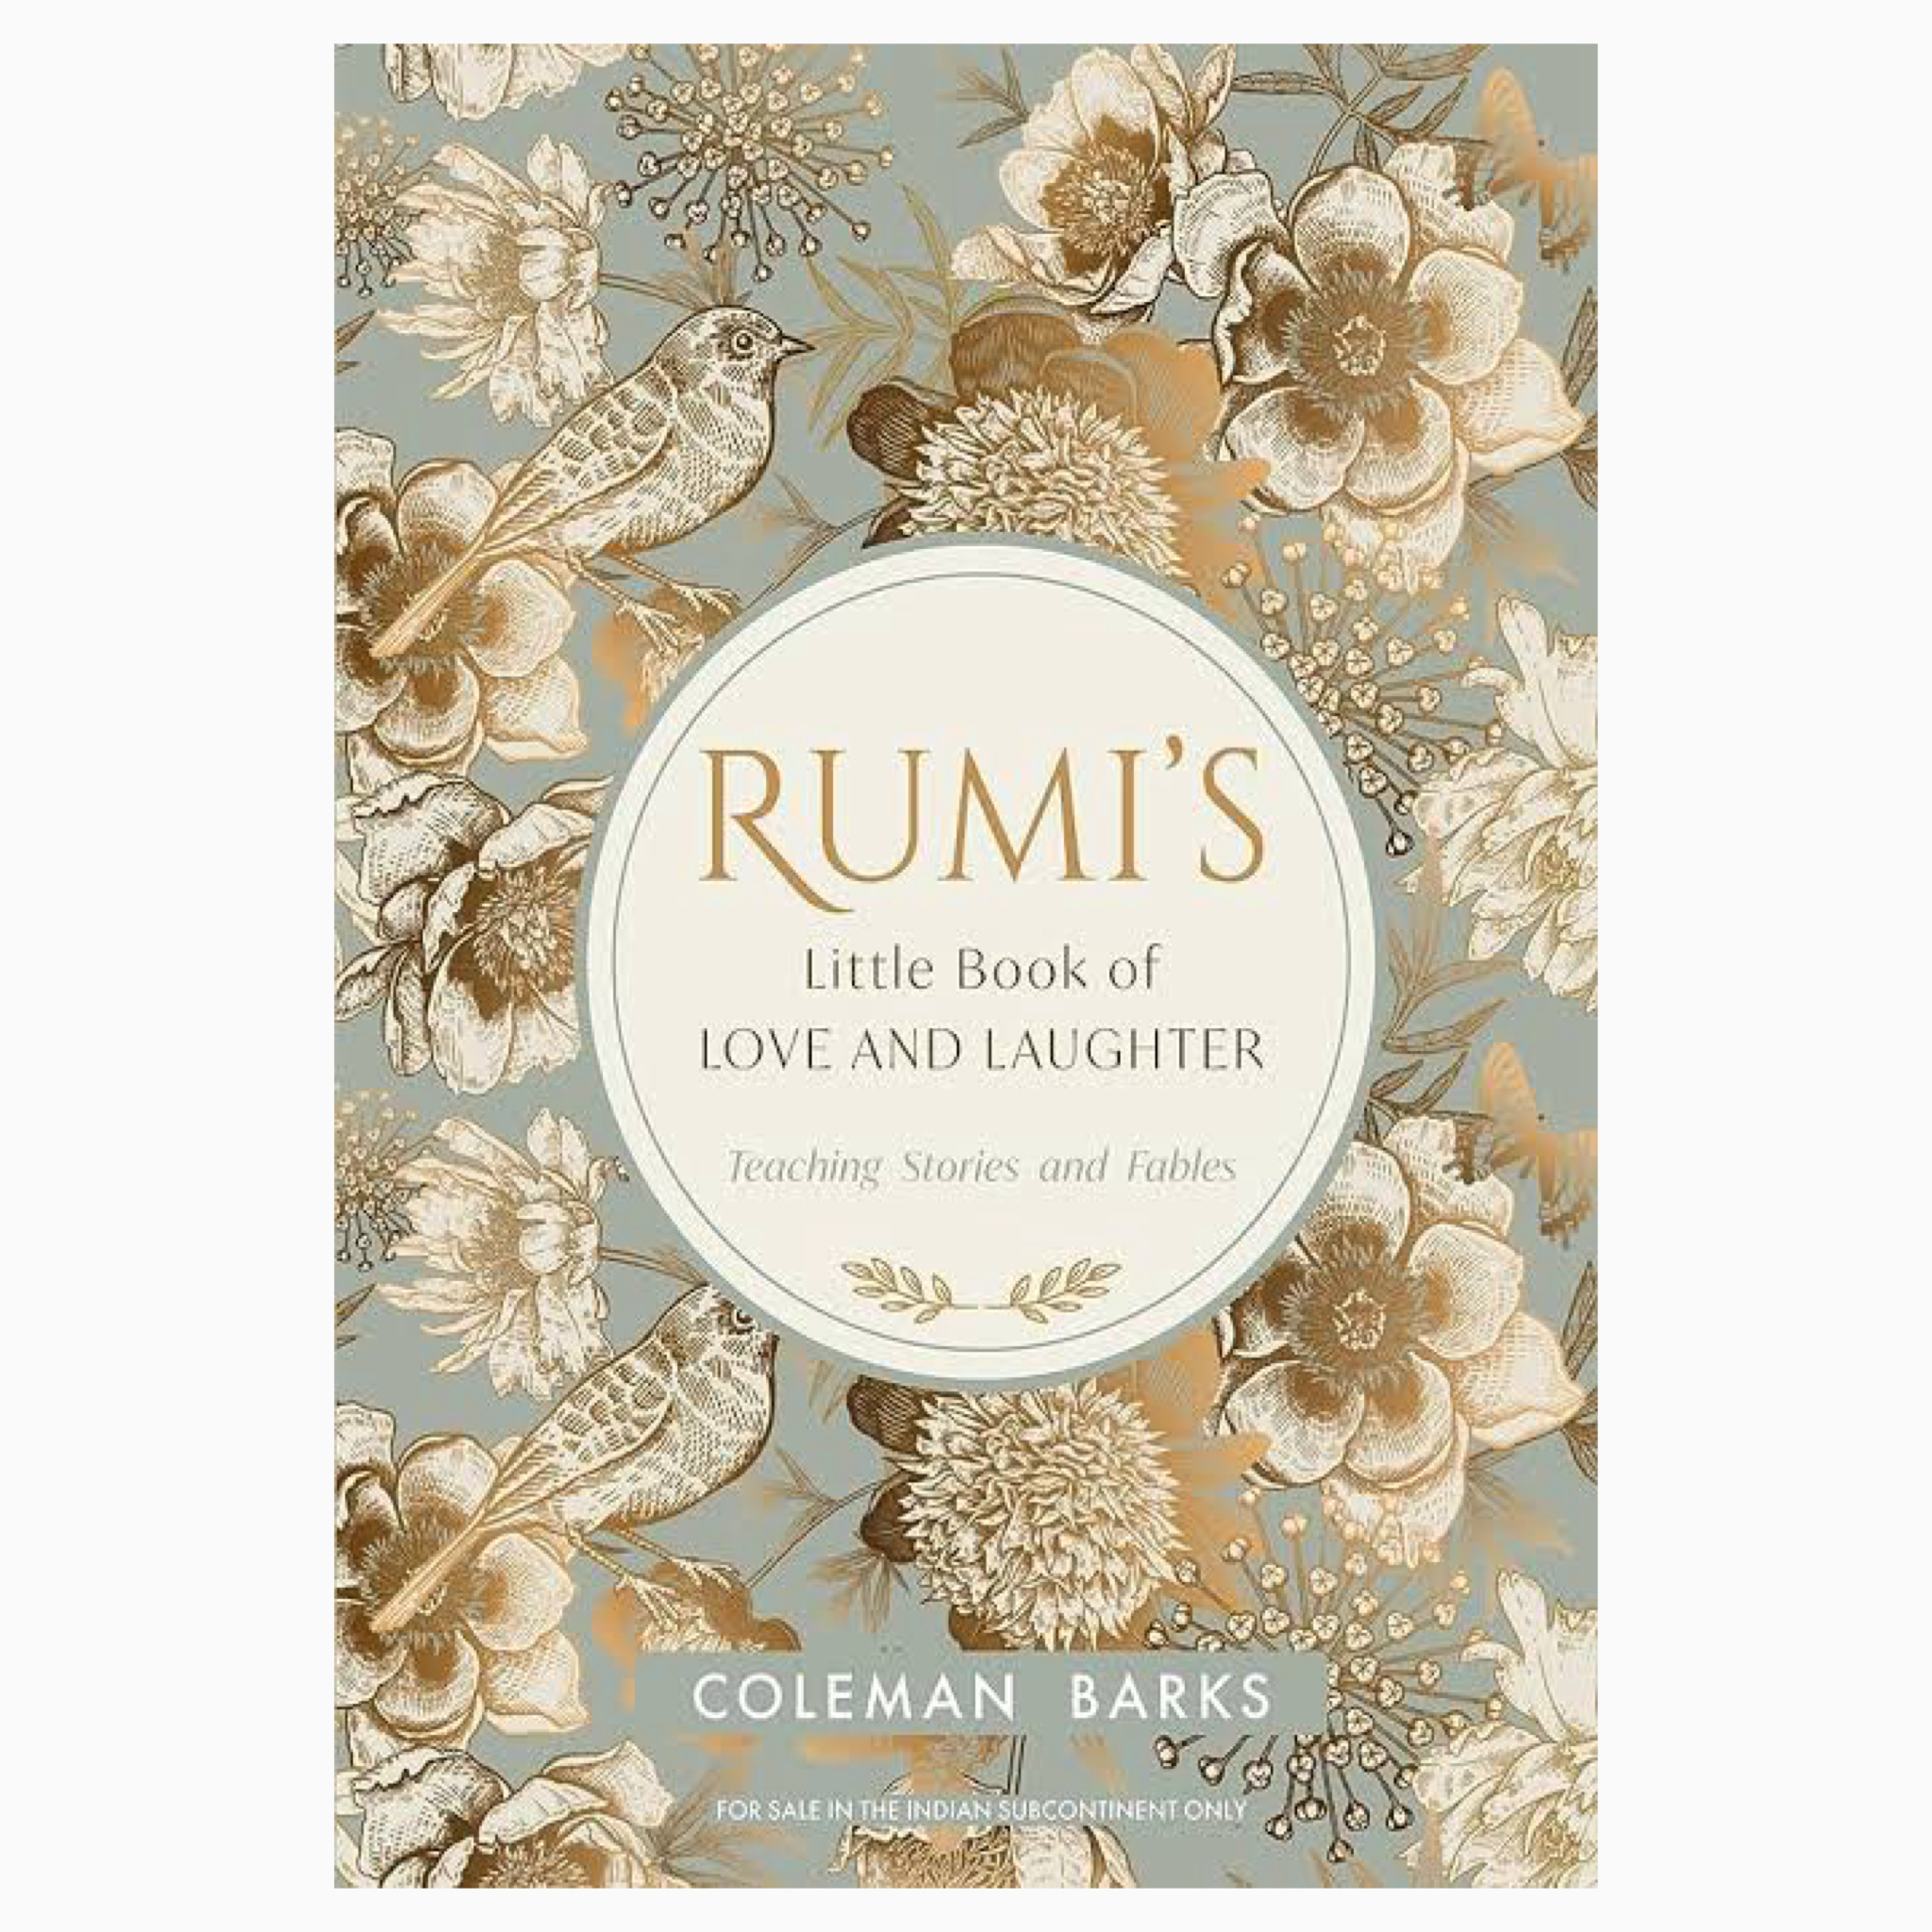 Rumi's Little Book of Love and Laughter by Coleman Barks